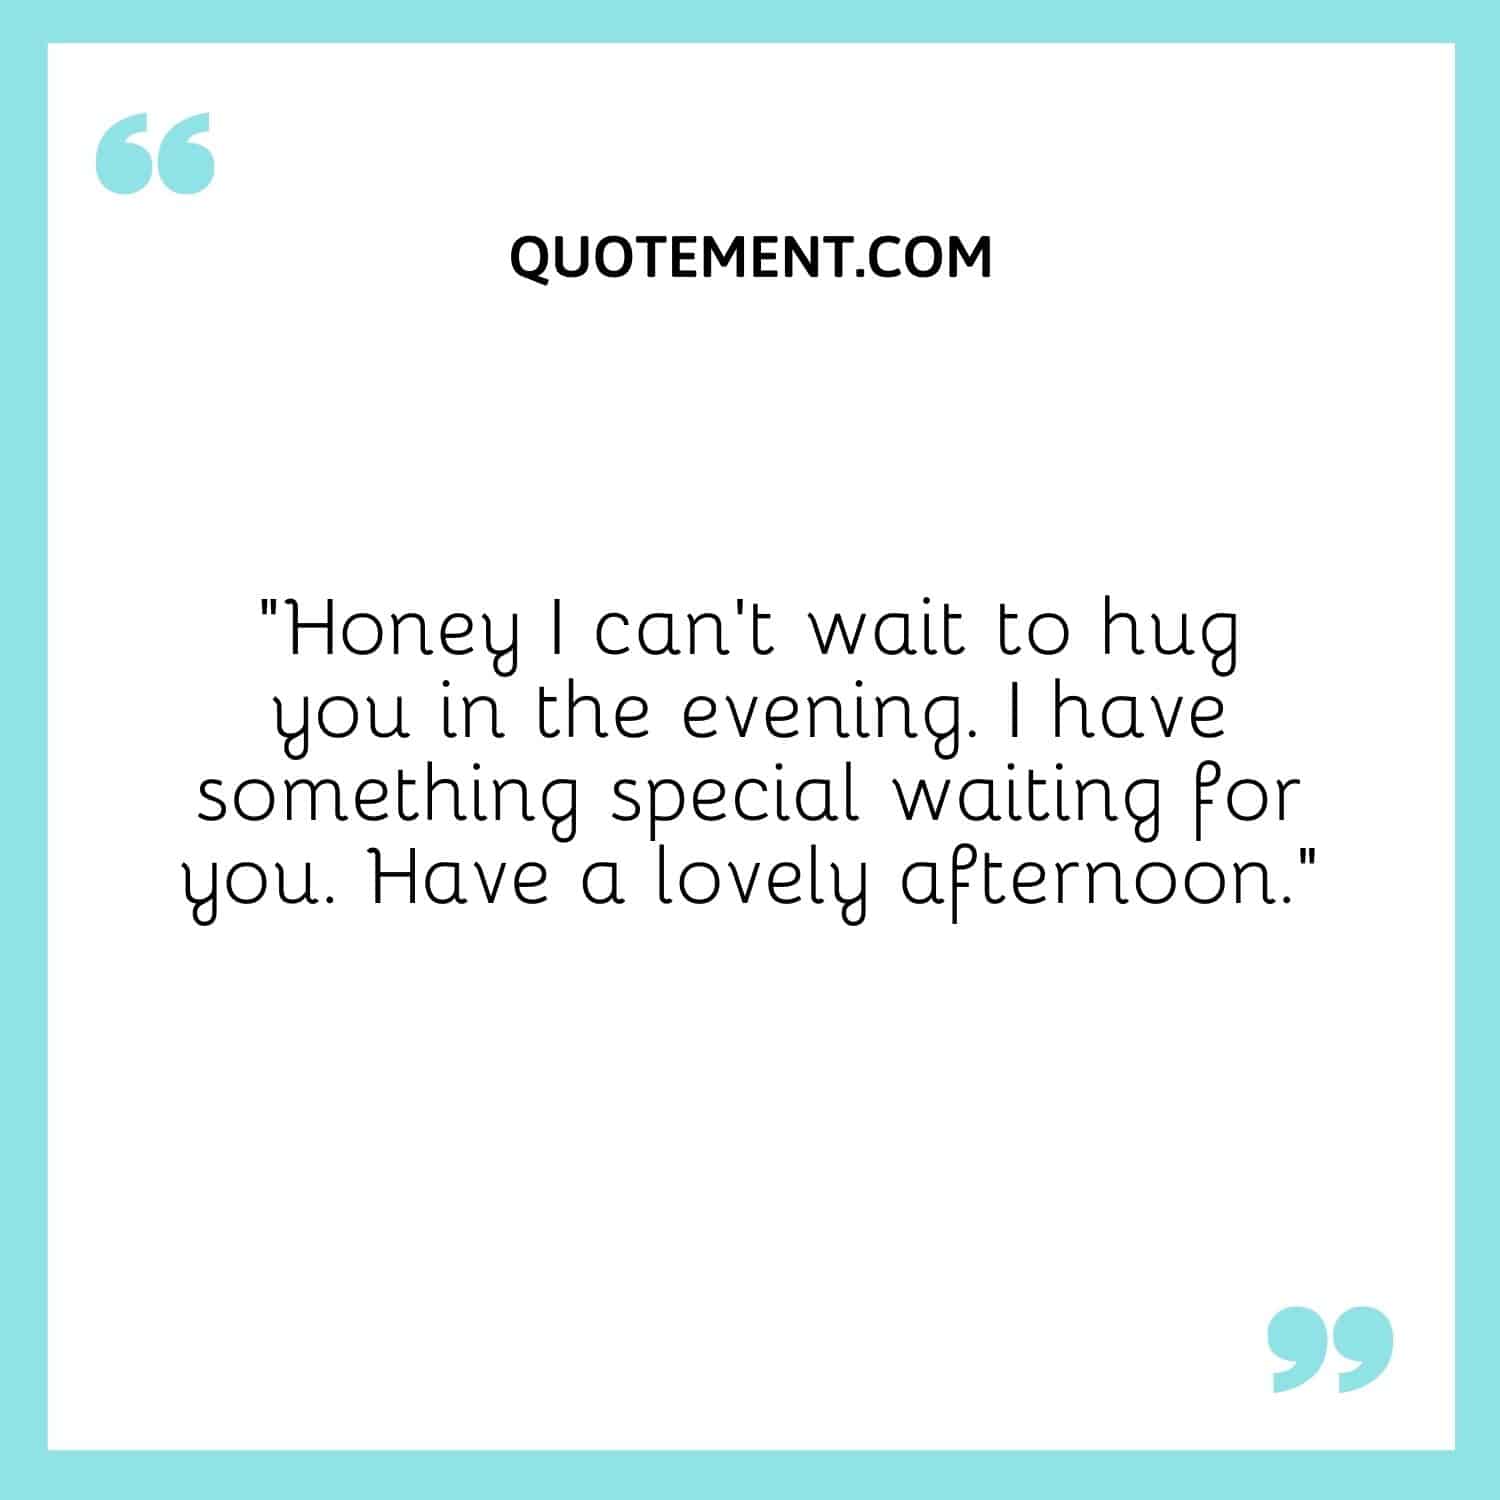 I can’t wait to hug you in the evening